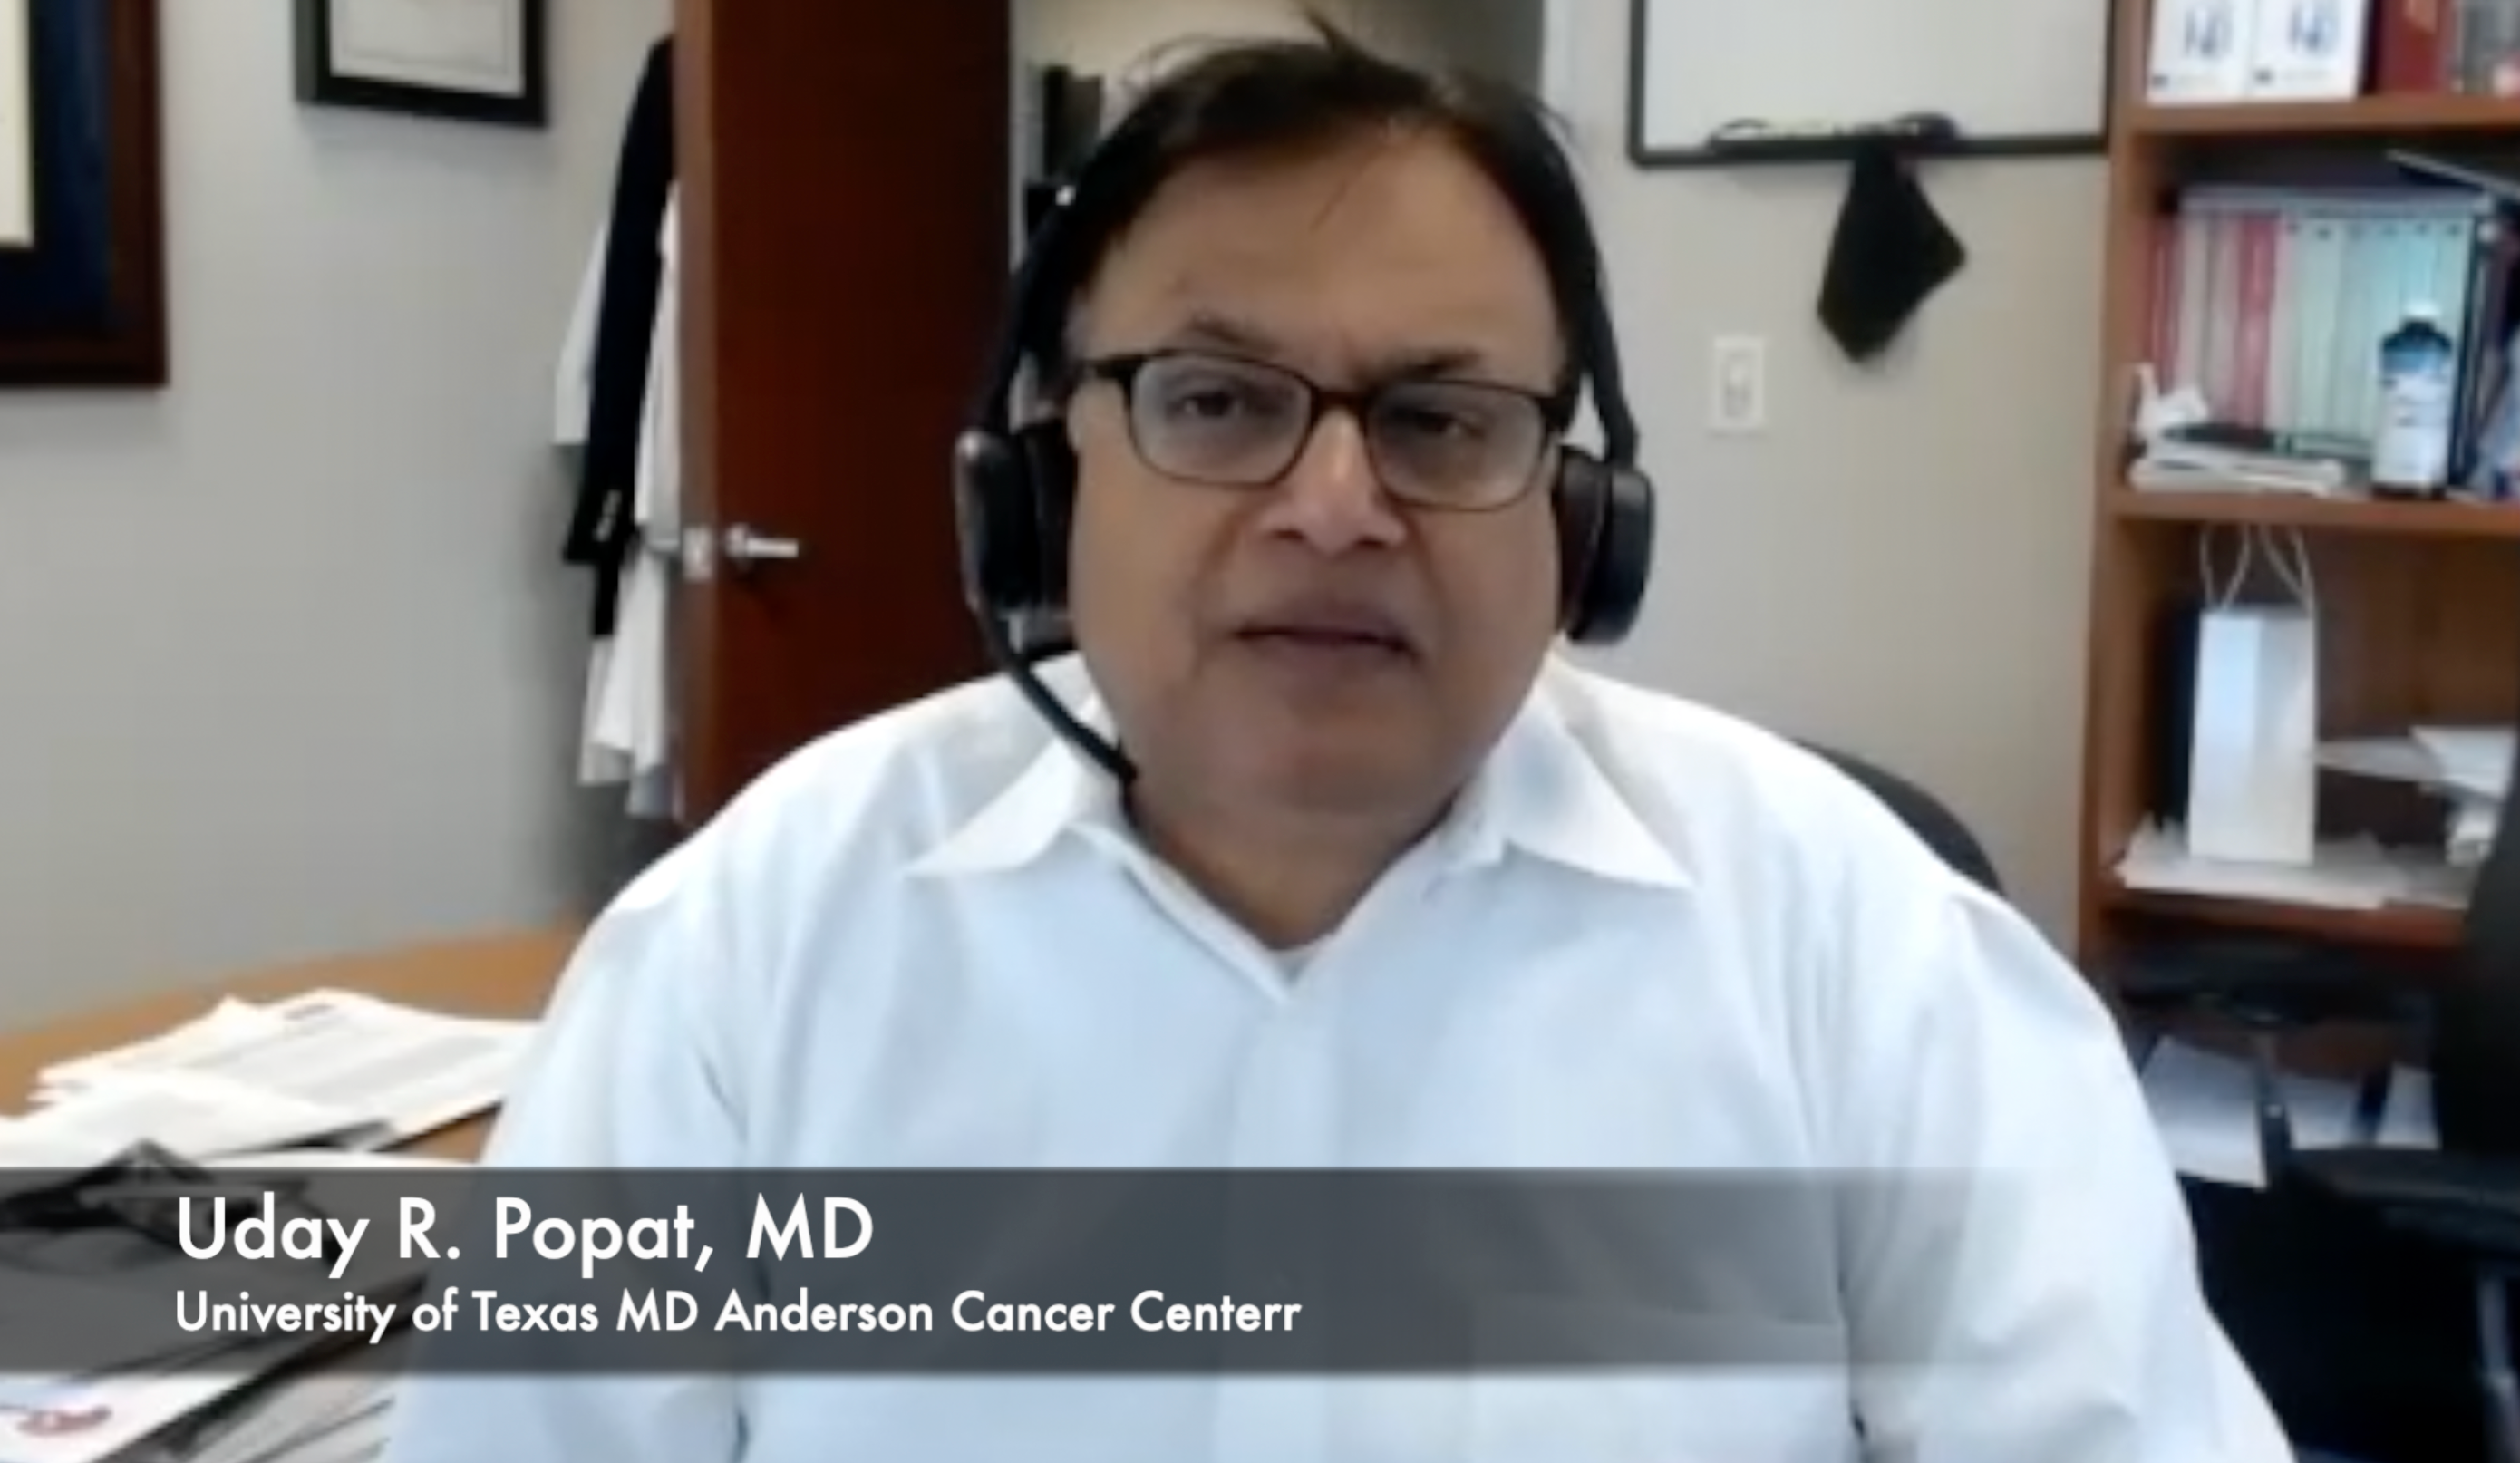 Uday R. Popat, MD, on the Future of Post-Transplant Cyclophosphamide to Prevent GVHD After Transplant for AML/MDS